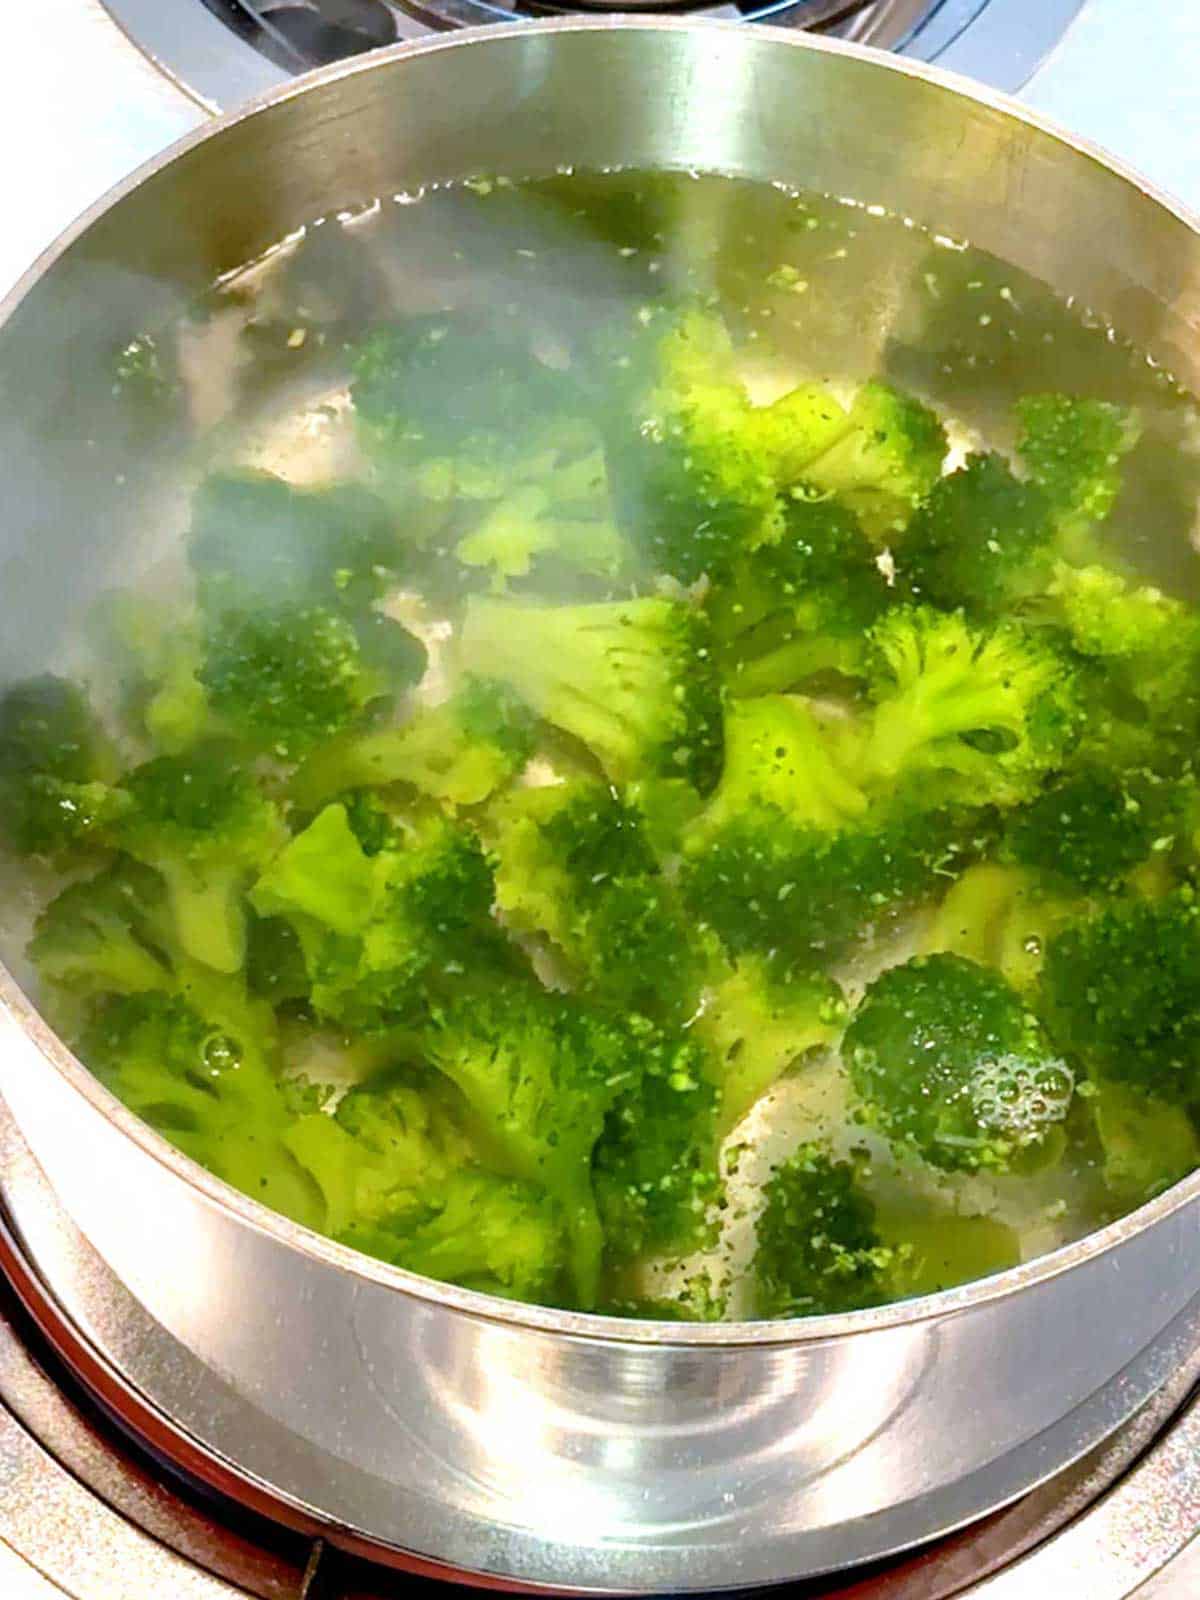 Cooking the broccoli in salted boiling water.